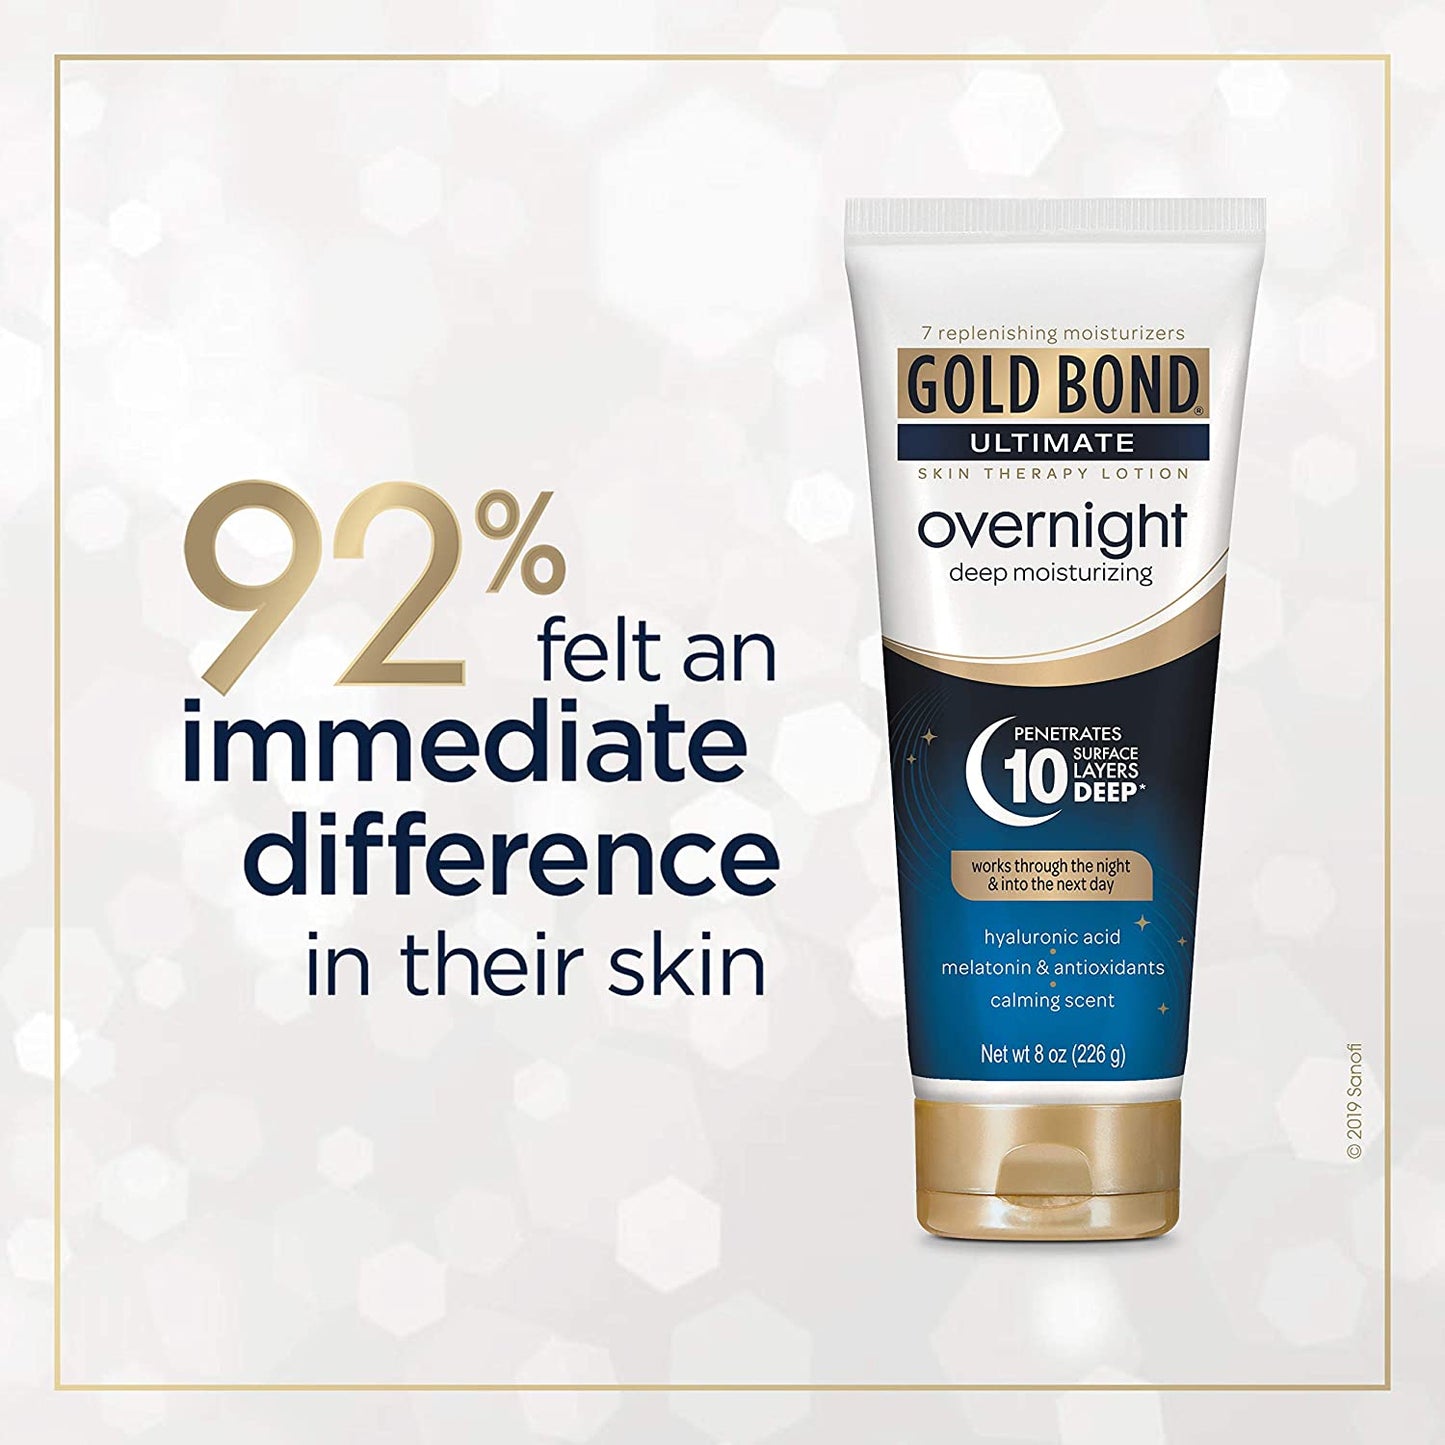 Gold Bond Ultimate Overnight Deep Moisturizing Lotion, 8 oz. / 226g PACKAGING MAY VARY